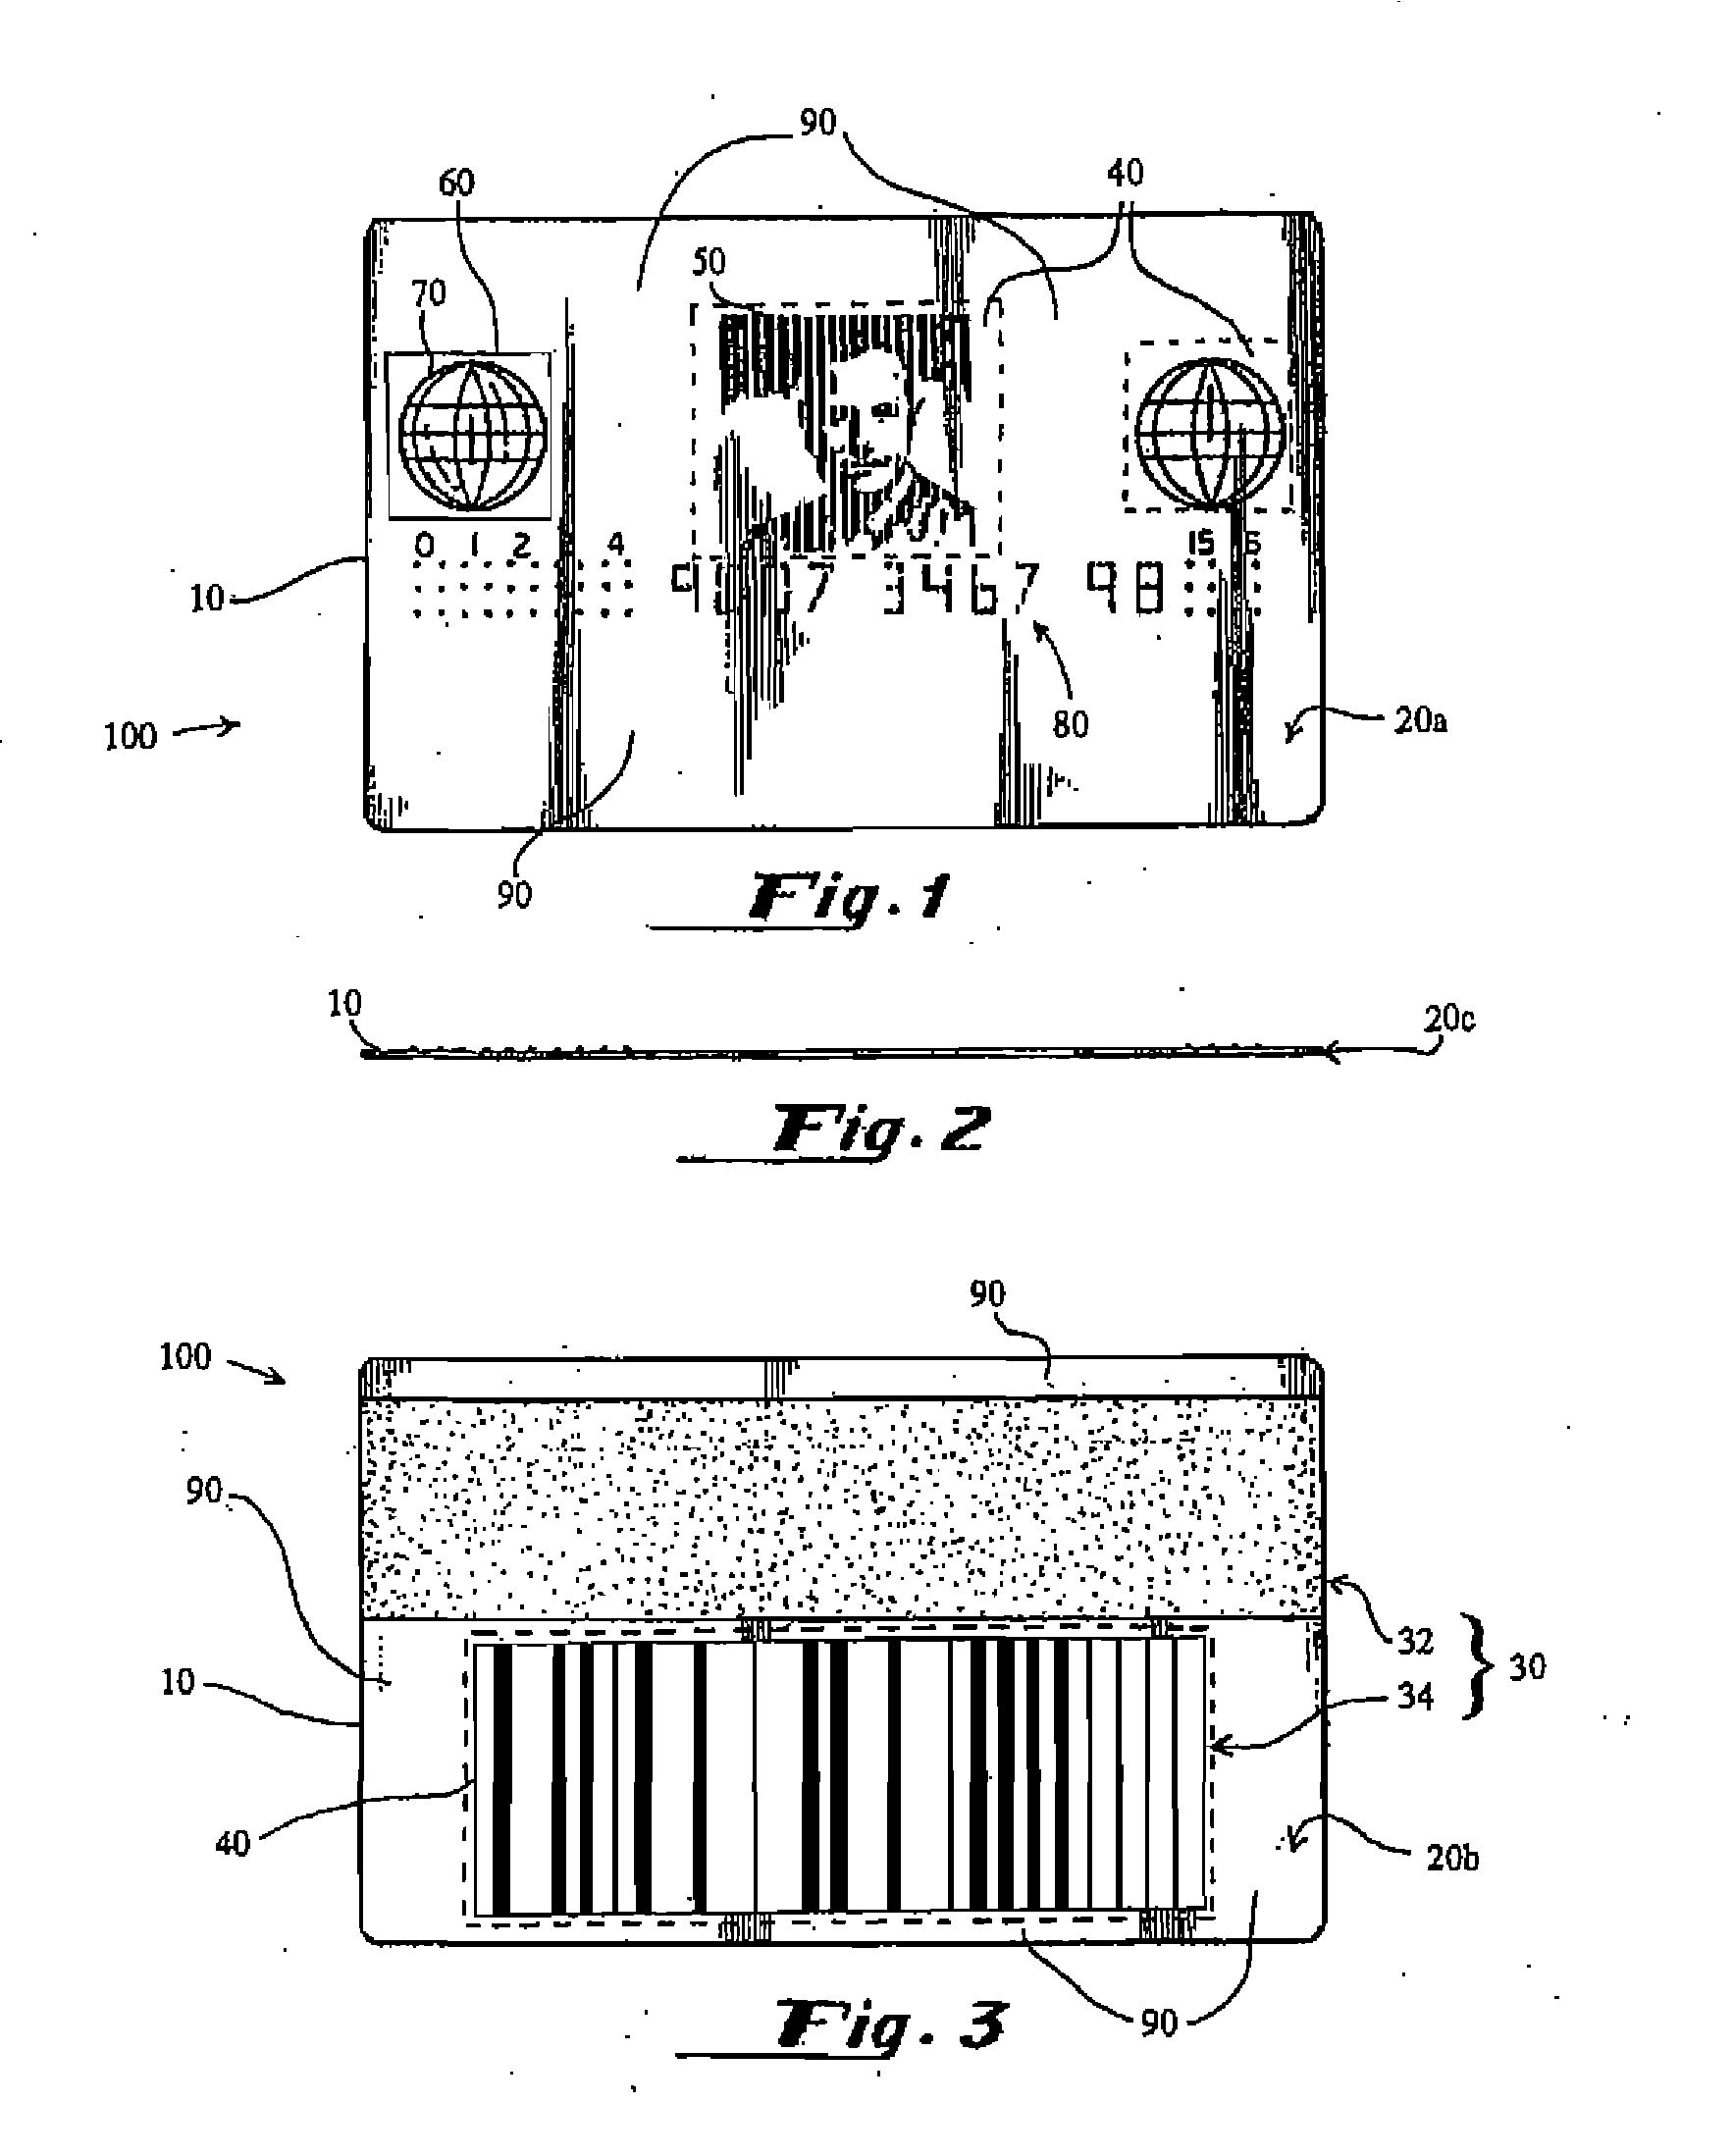 Scented authorization card and method of manufacture